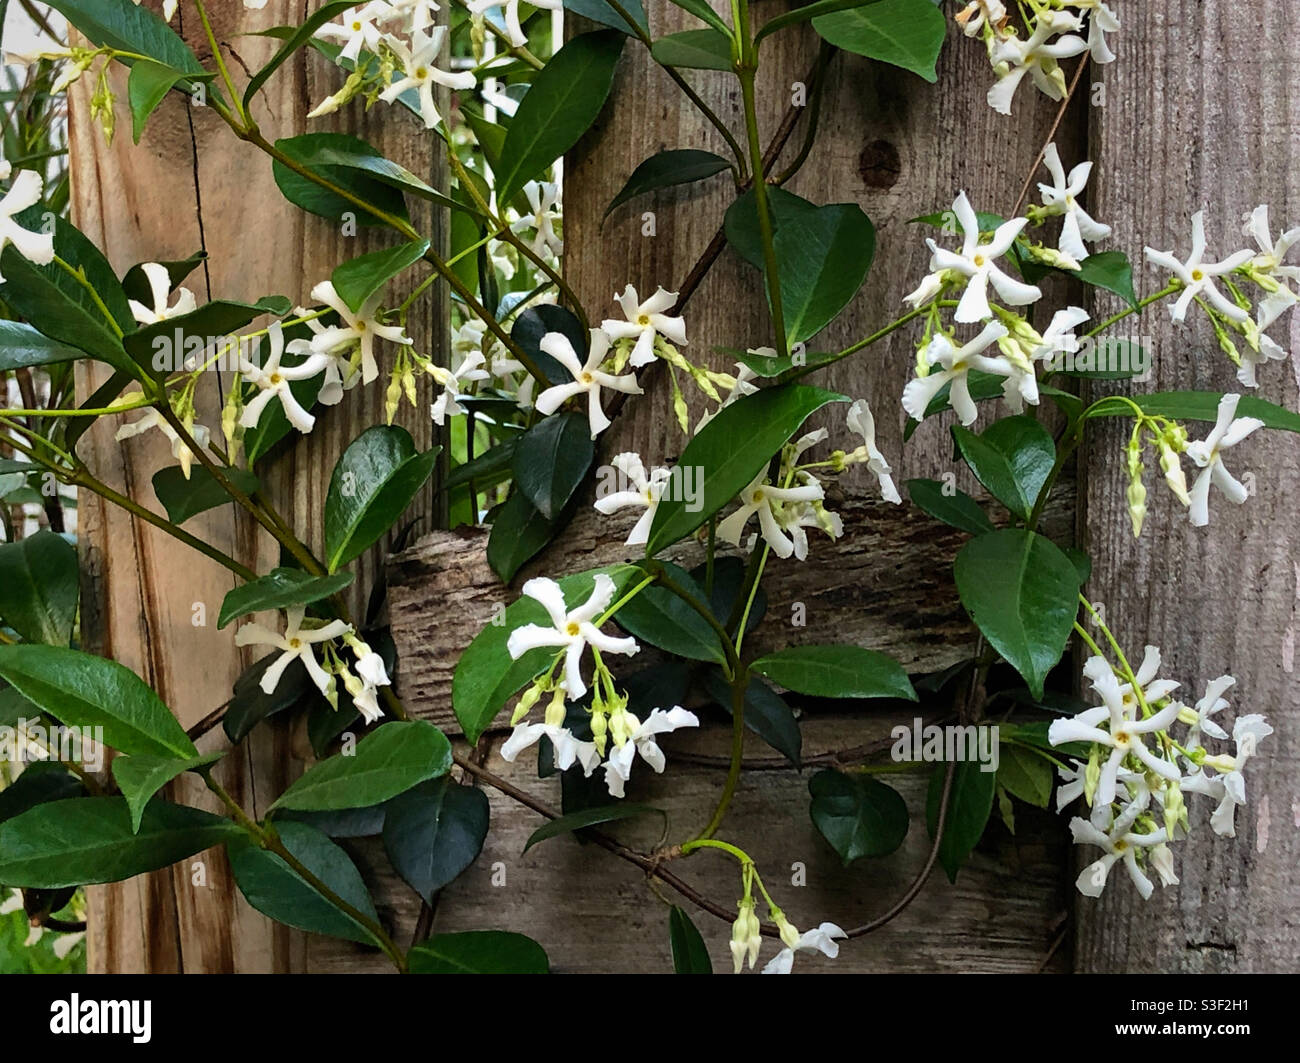 Confederate jasmine, or star jasmine growing on a rustic fence in north Florida. The scientific name for the plant is Trachelospermum jasminoides. Stock Photo